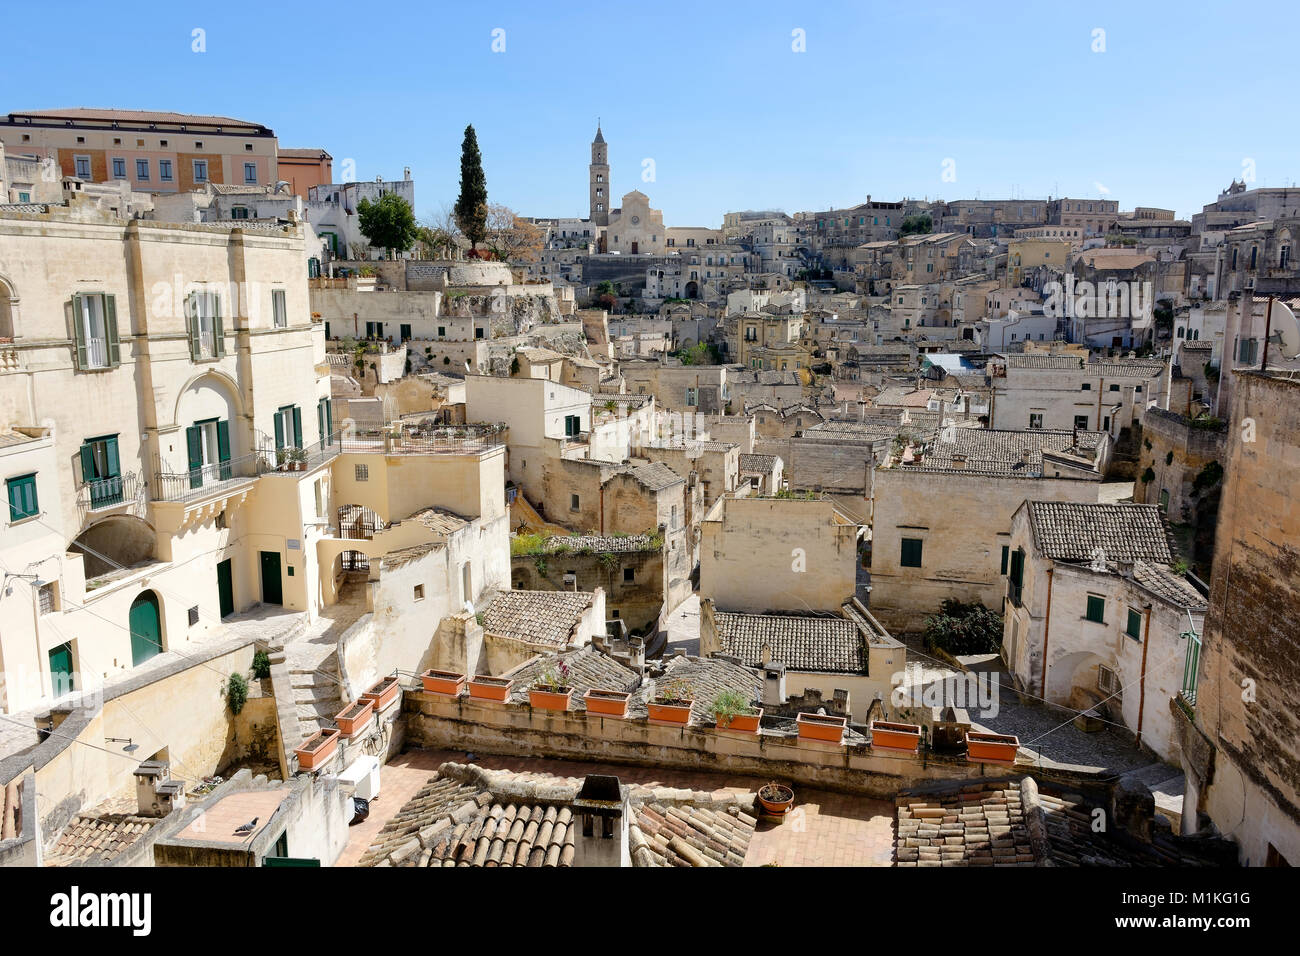 view of the town of matera taken from the central area of the town Stock Photo